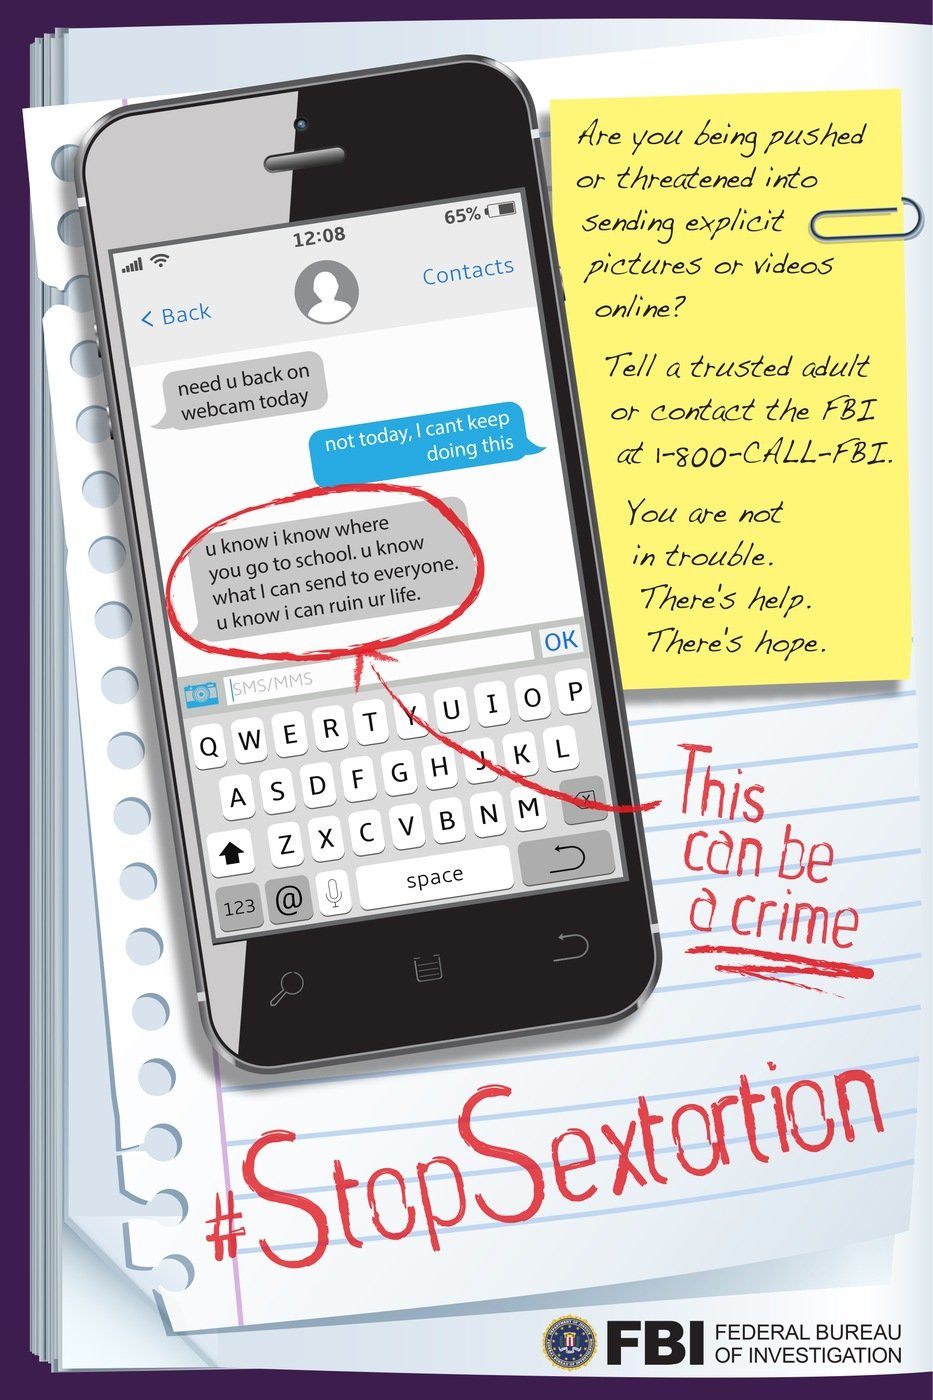 Poster encouraging young people to report sextortion to the FBI if they are a victim.